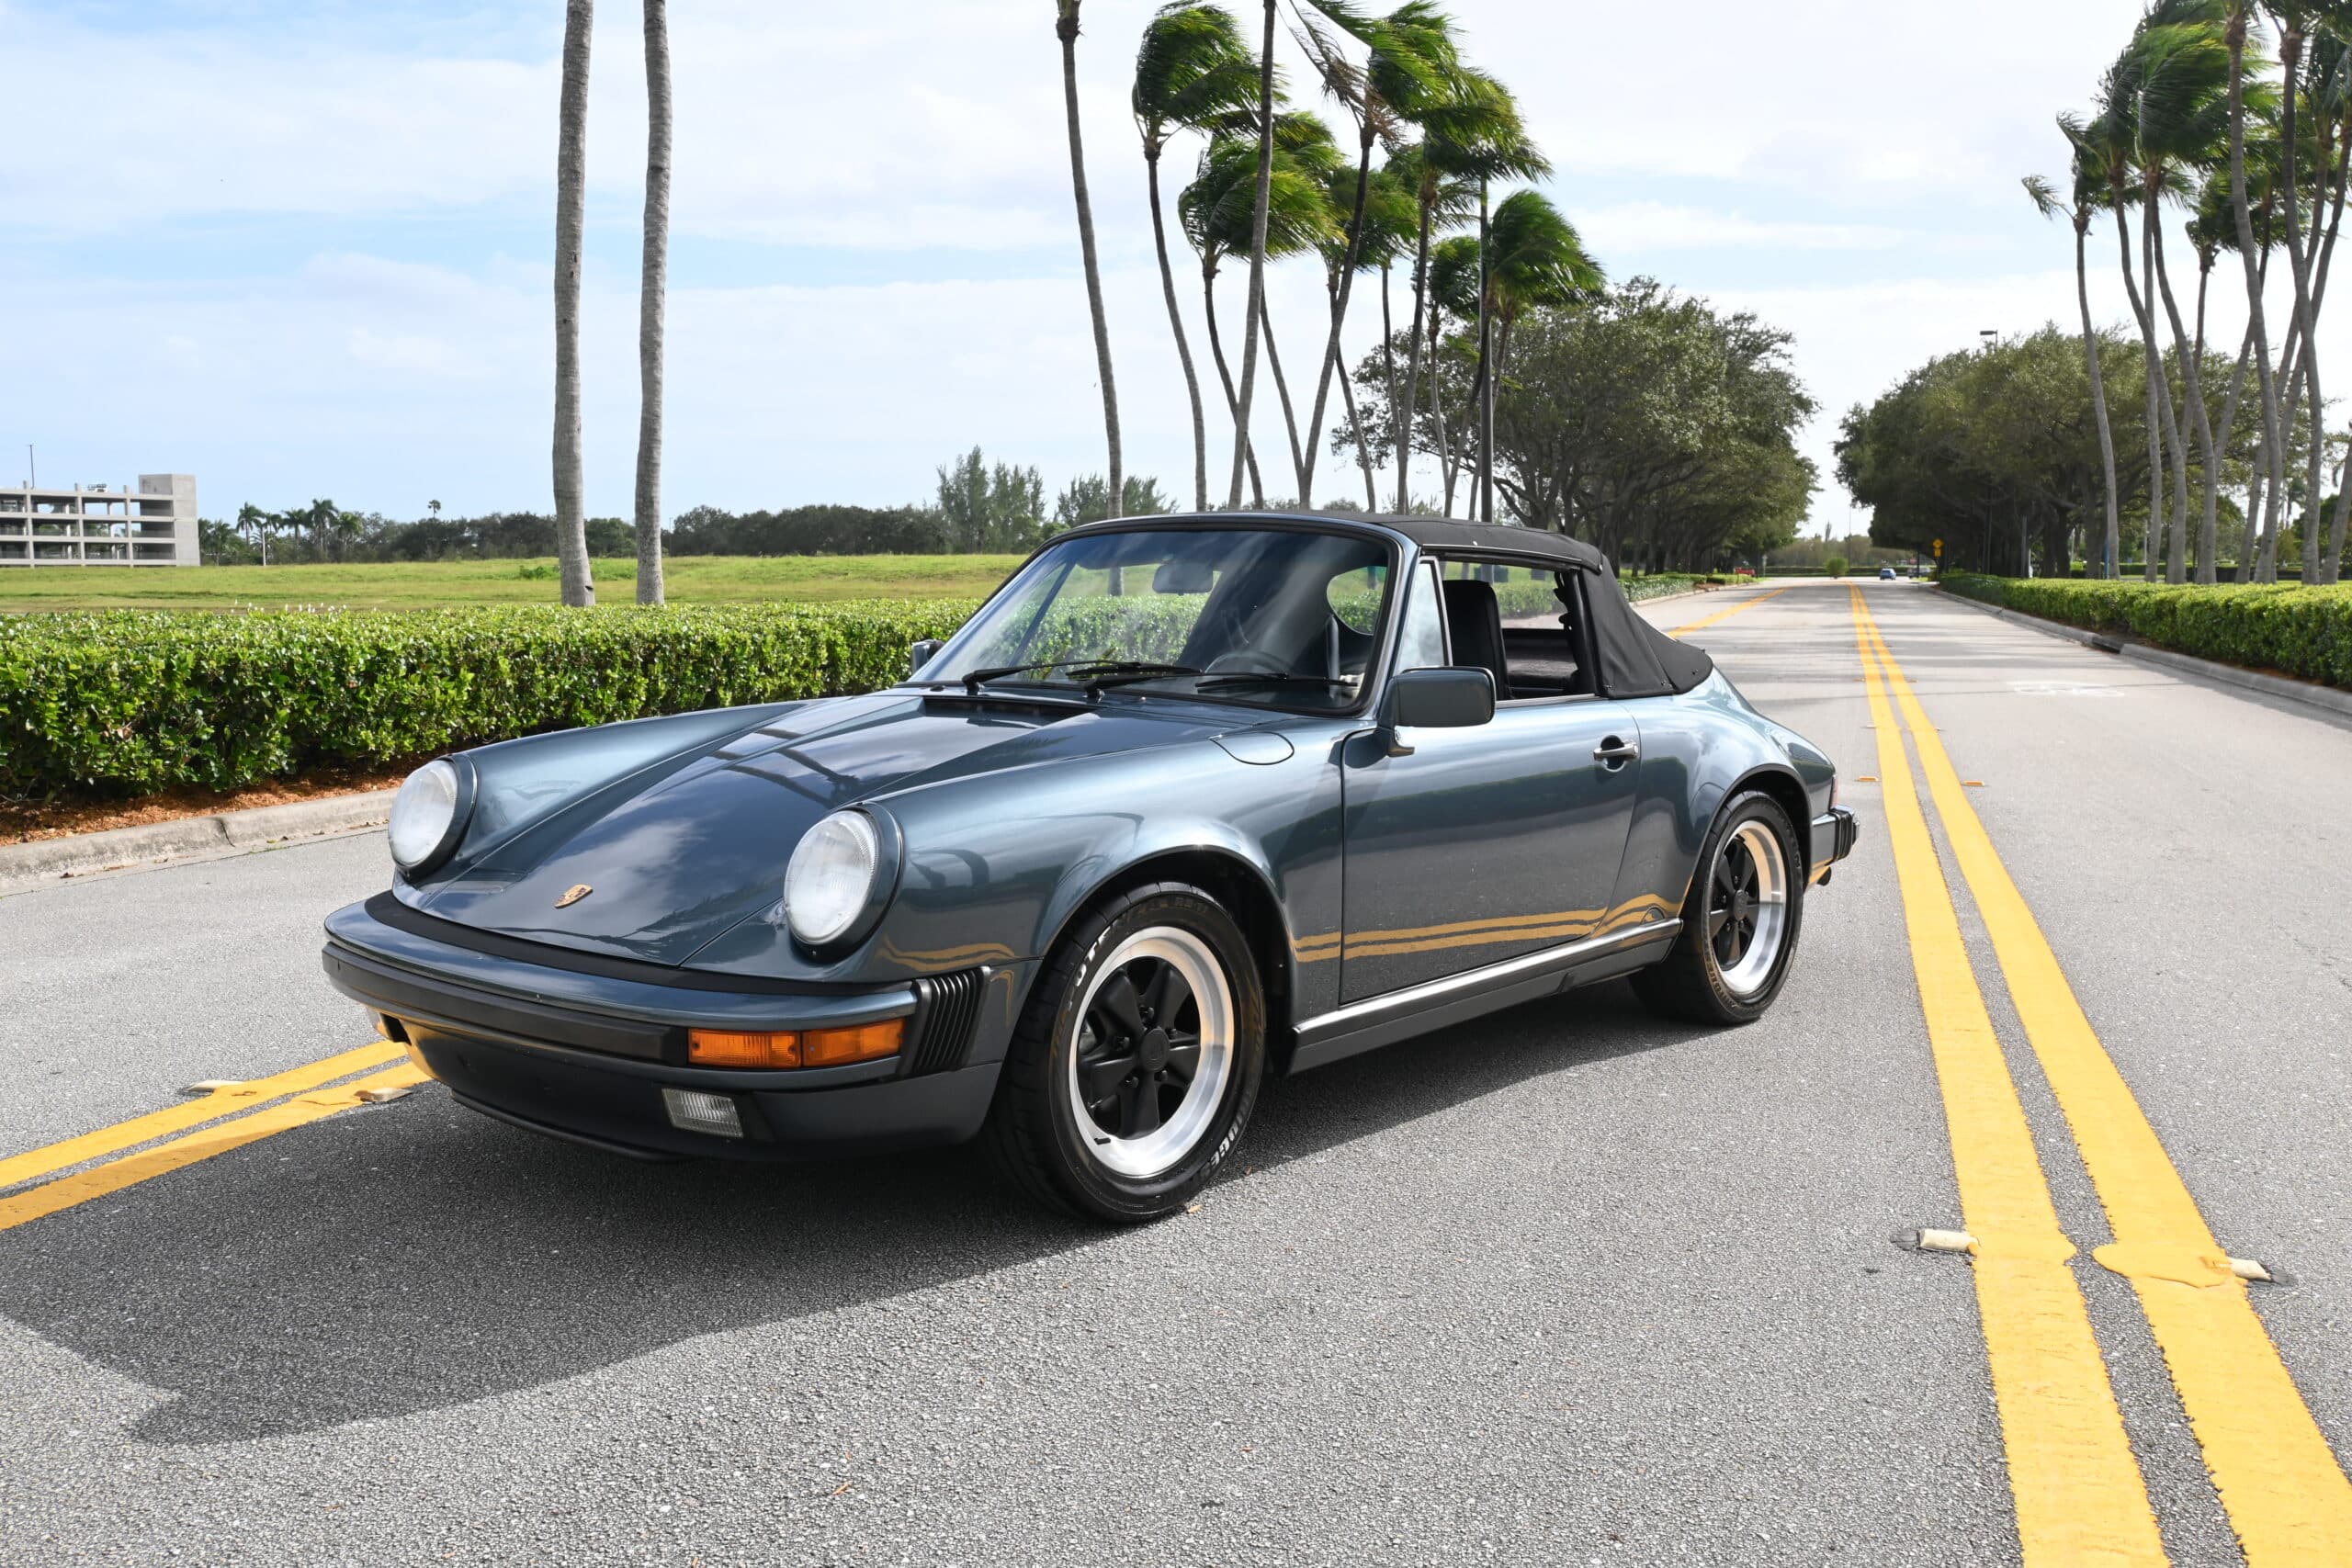 1987 Porsche 911 Carrera, G50 transmission!, documented miles with service records and service manual, outstanding condition, books, tools